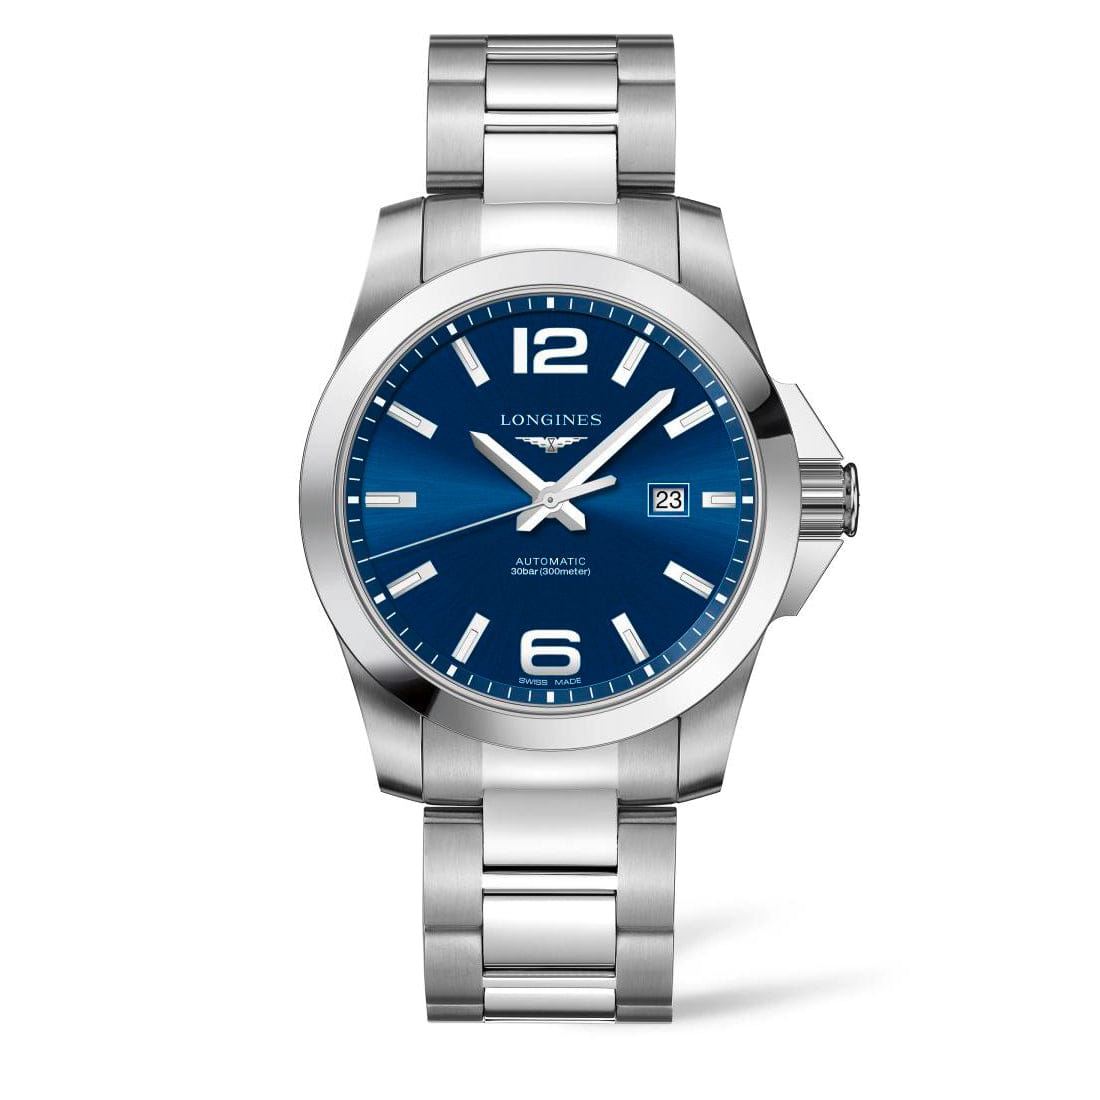 Conquest 43mm Automatic, Long's Jewelers